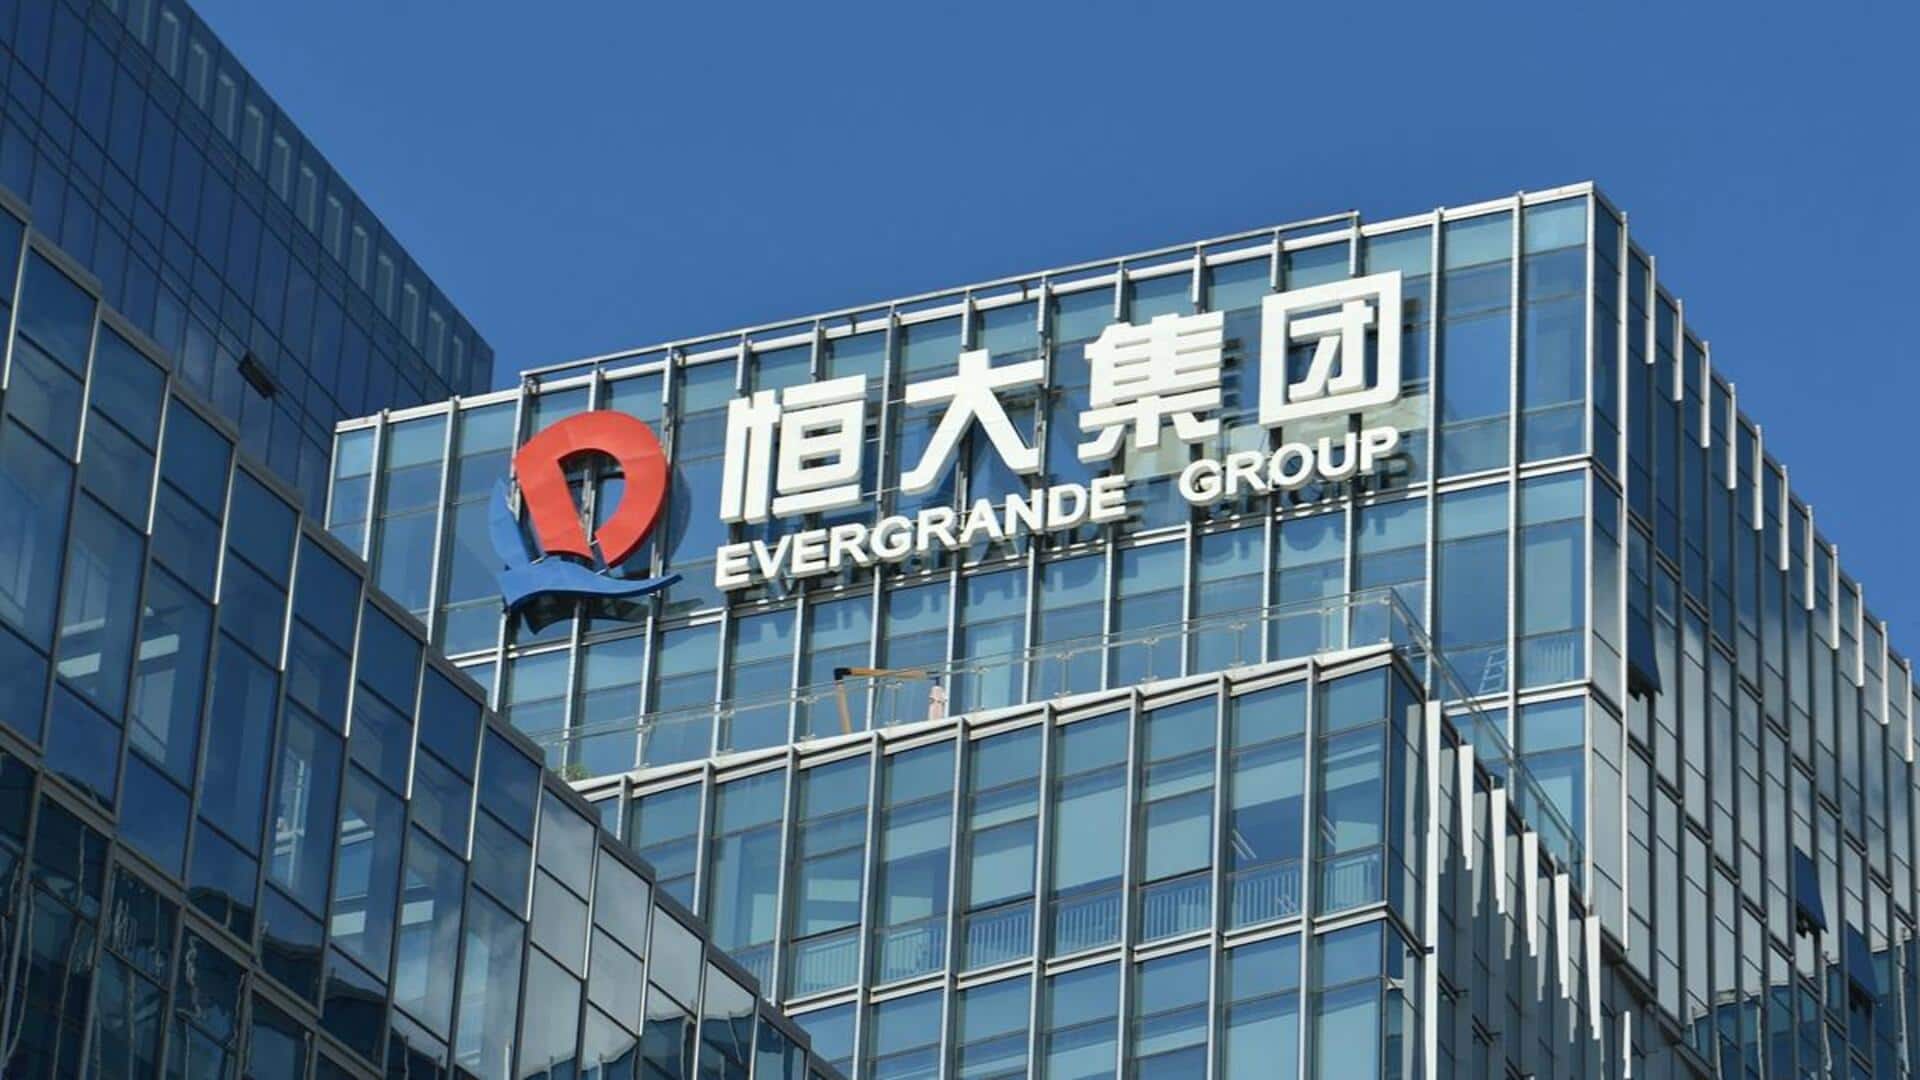 China Evergrande and its founder accused of $78 billion fraud